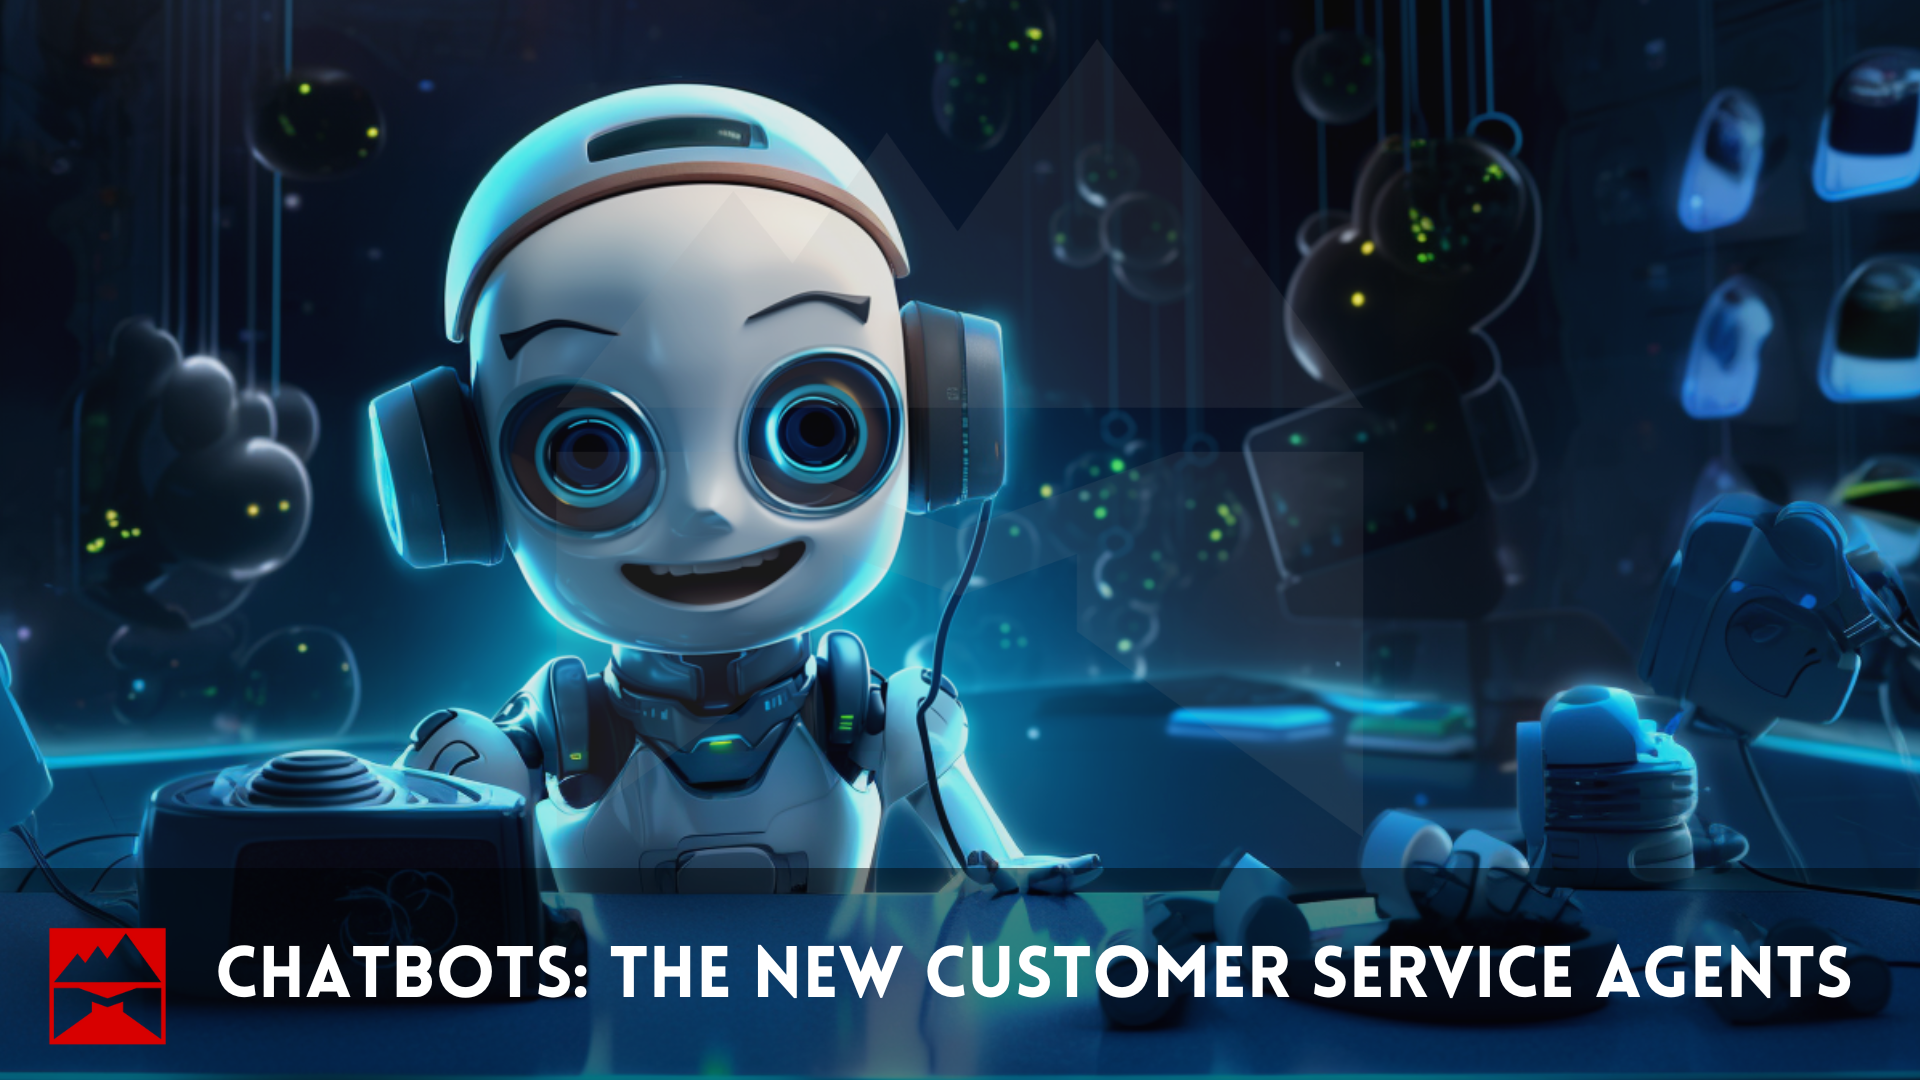 Chatbots: The New Customer Service Agents